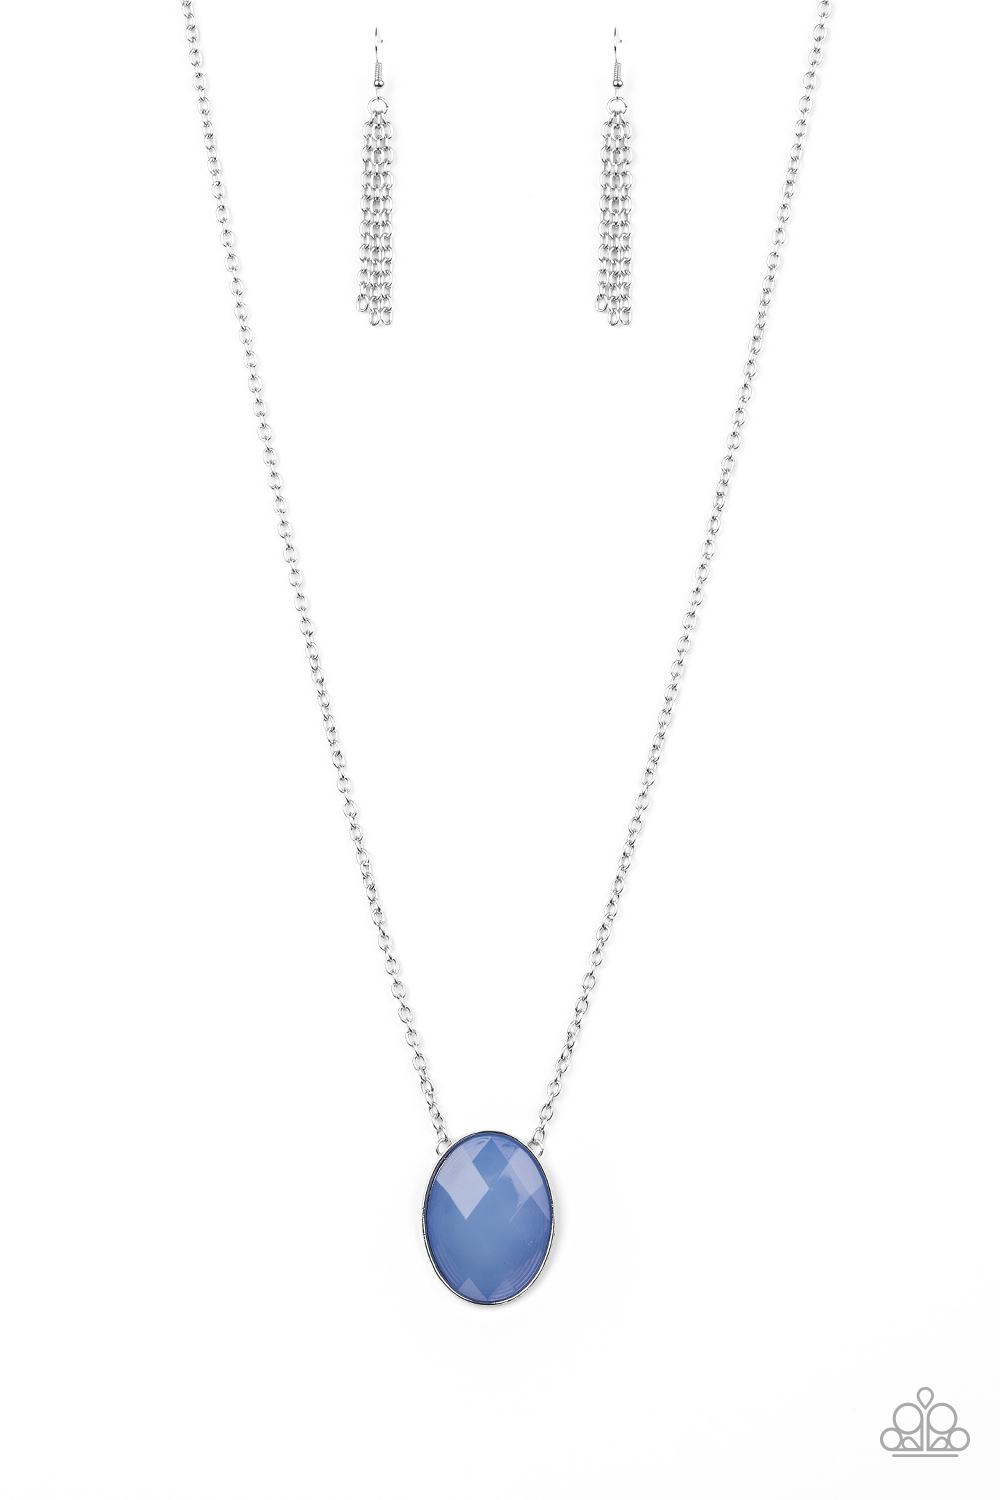 Necklace - Intensely Illuminated - Blue